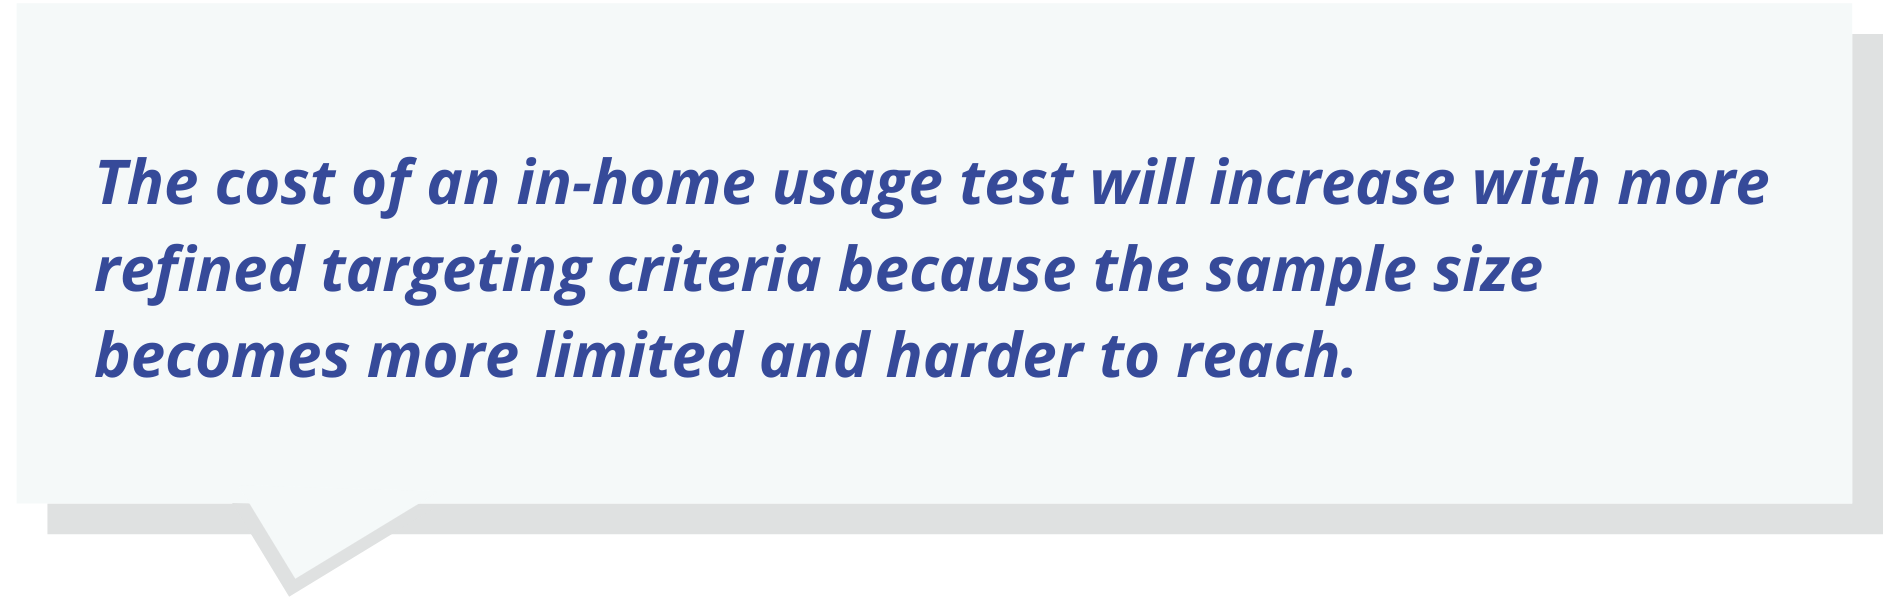 The cost of an in-home usage test will increase with more refined targeting criteria because the sample size becomes more limited and harder to reach.